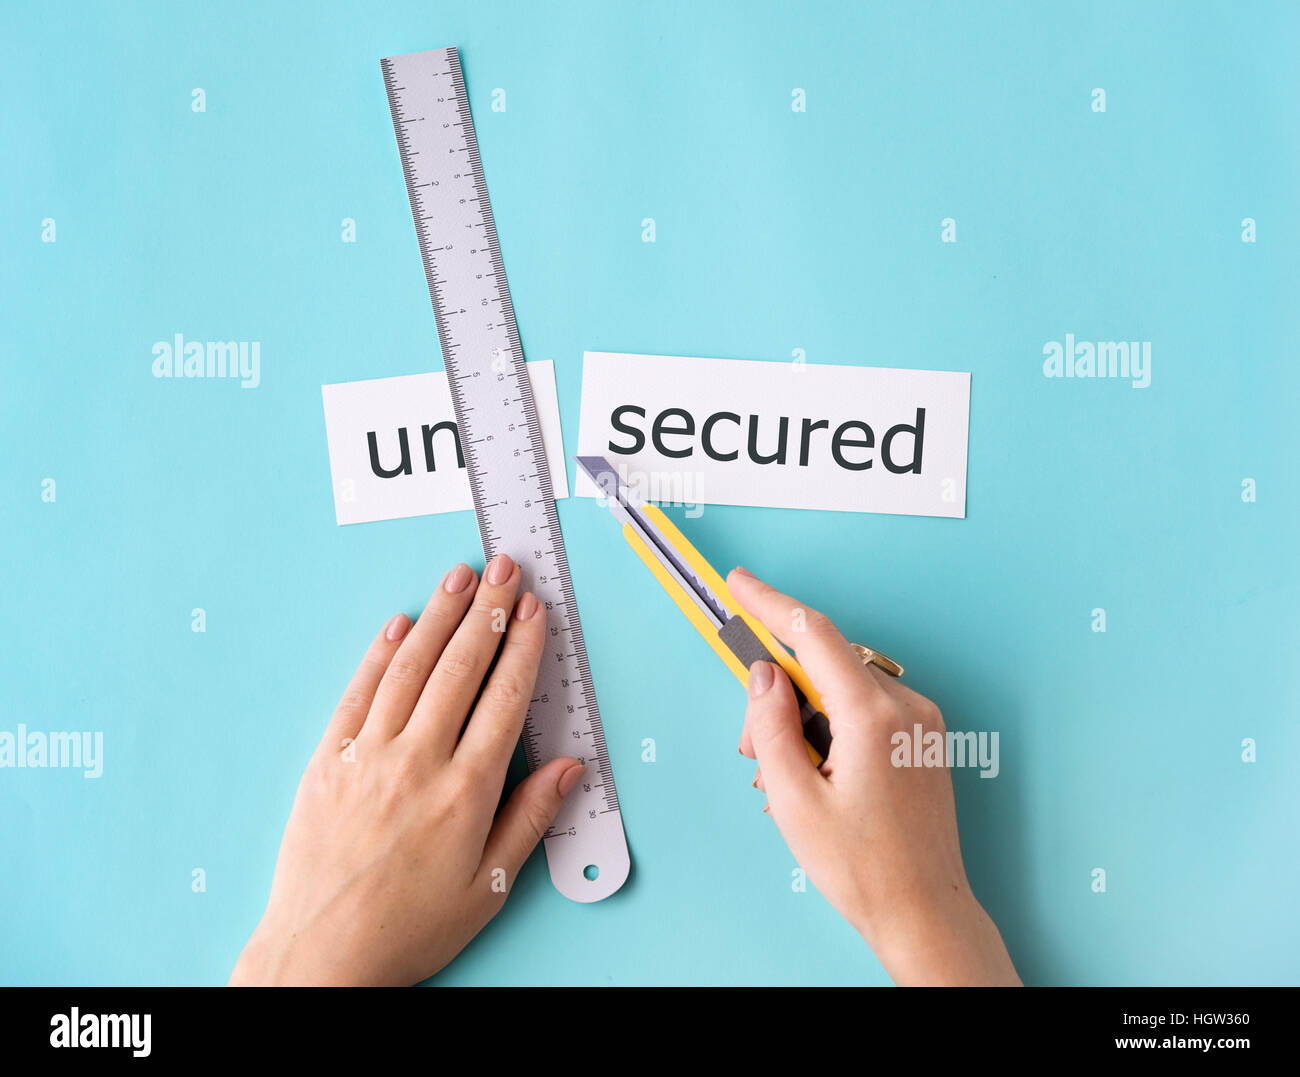 Unsecured Insecure Hand Cut Word Split Concept Stock Photo